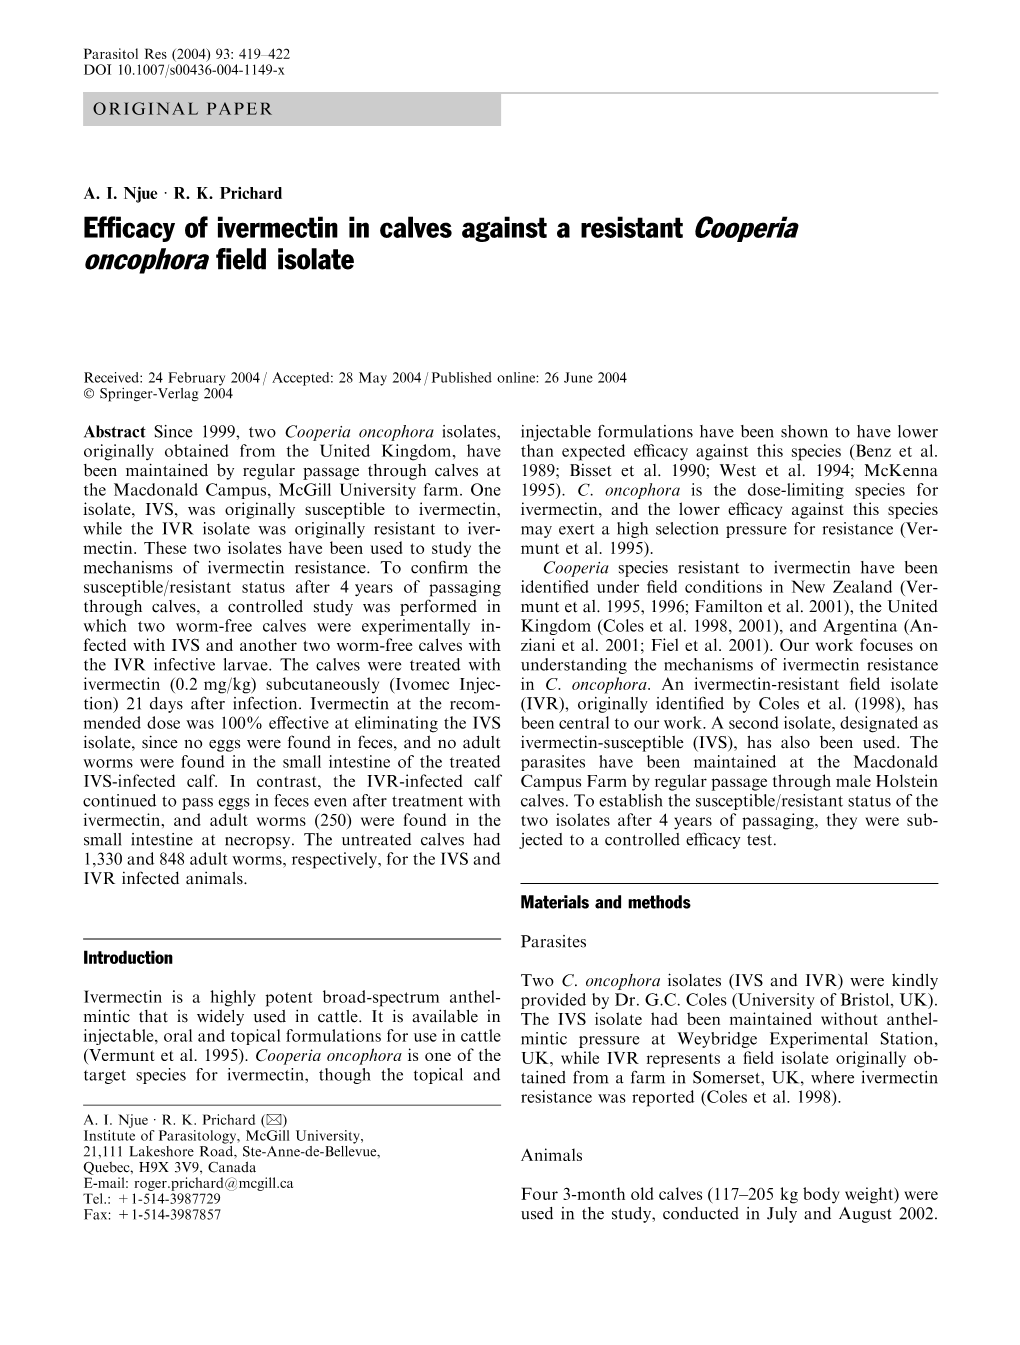 Efficacy of Ivermectin in Calves Against a Resistant Cooperia Oncophora